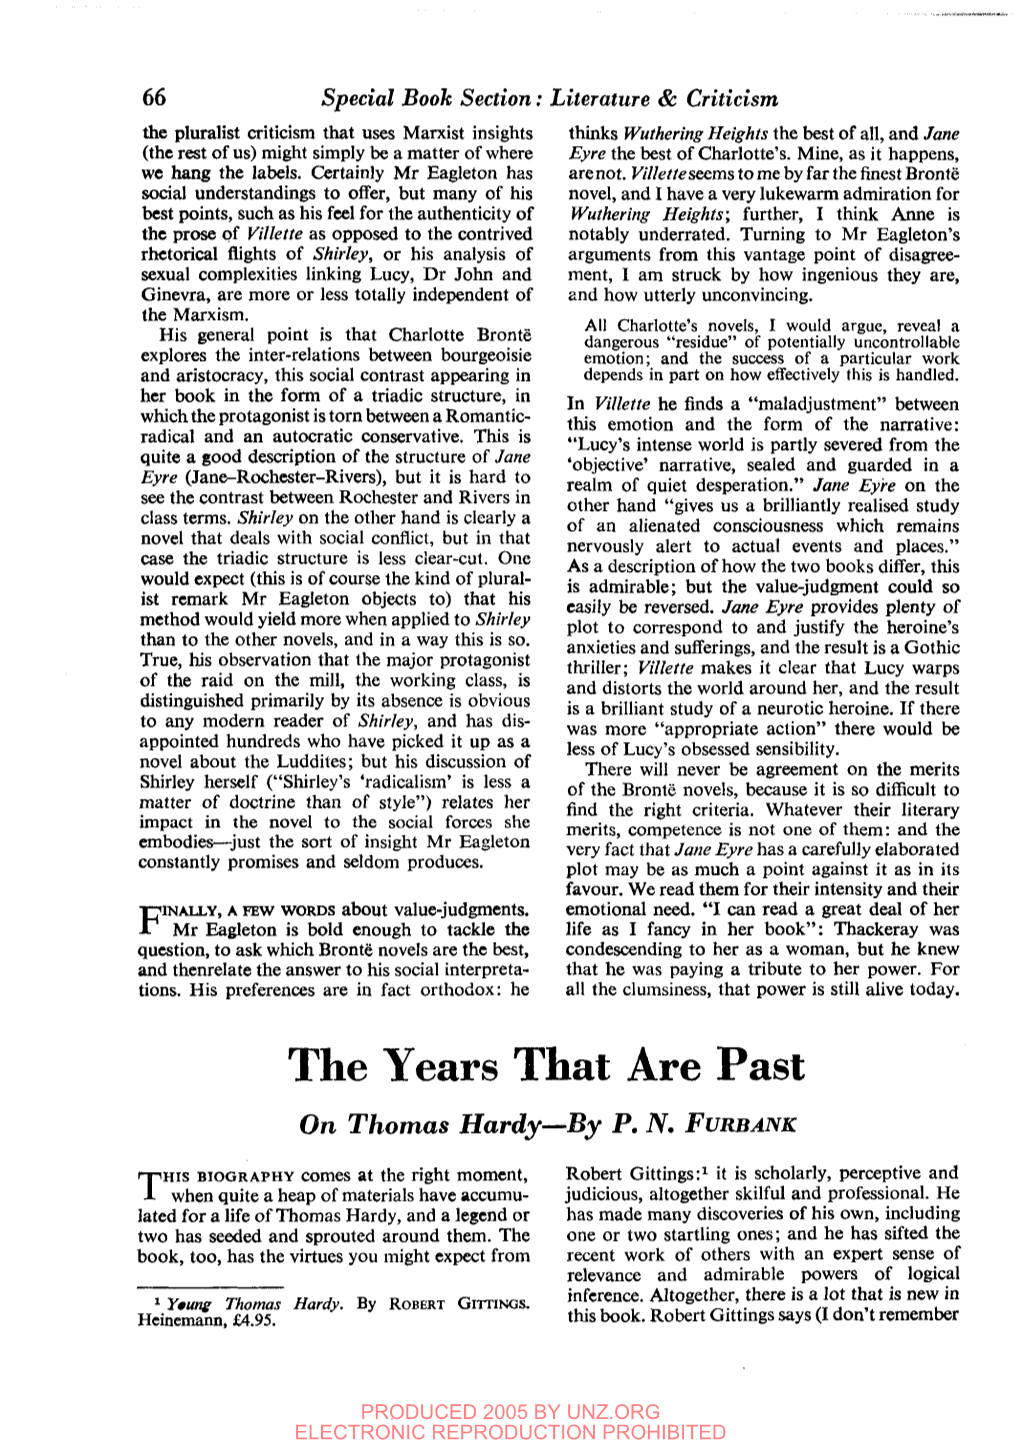 The Years That Are Past on Thomas Hardy—By PN FURBANK